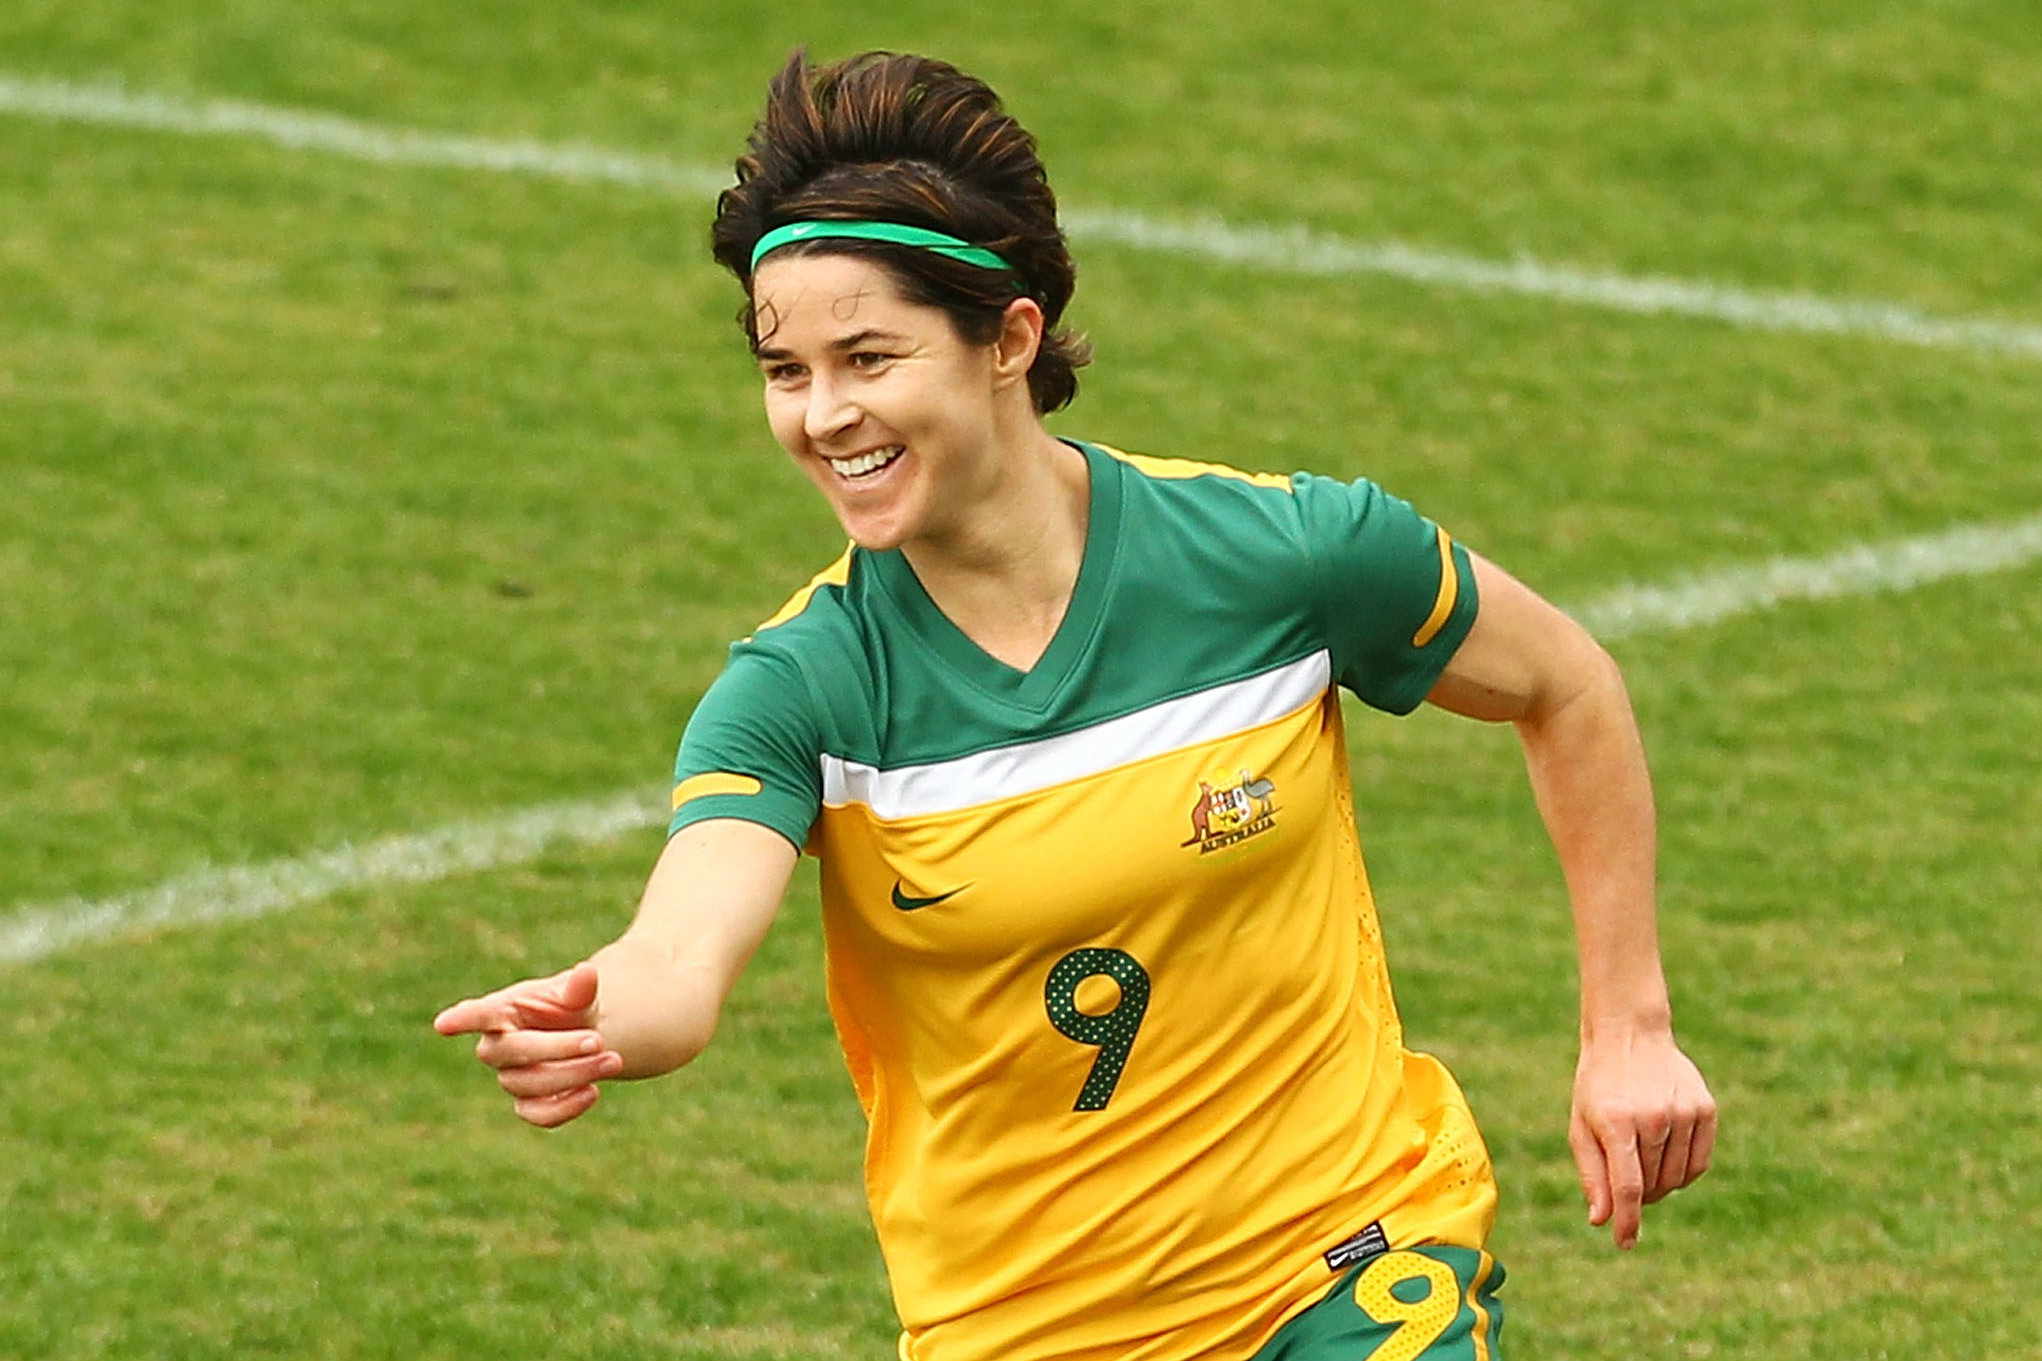 Sarah Walsh celebrating one of her many goals for the Westfield Matildas.